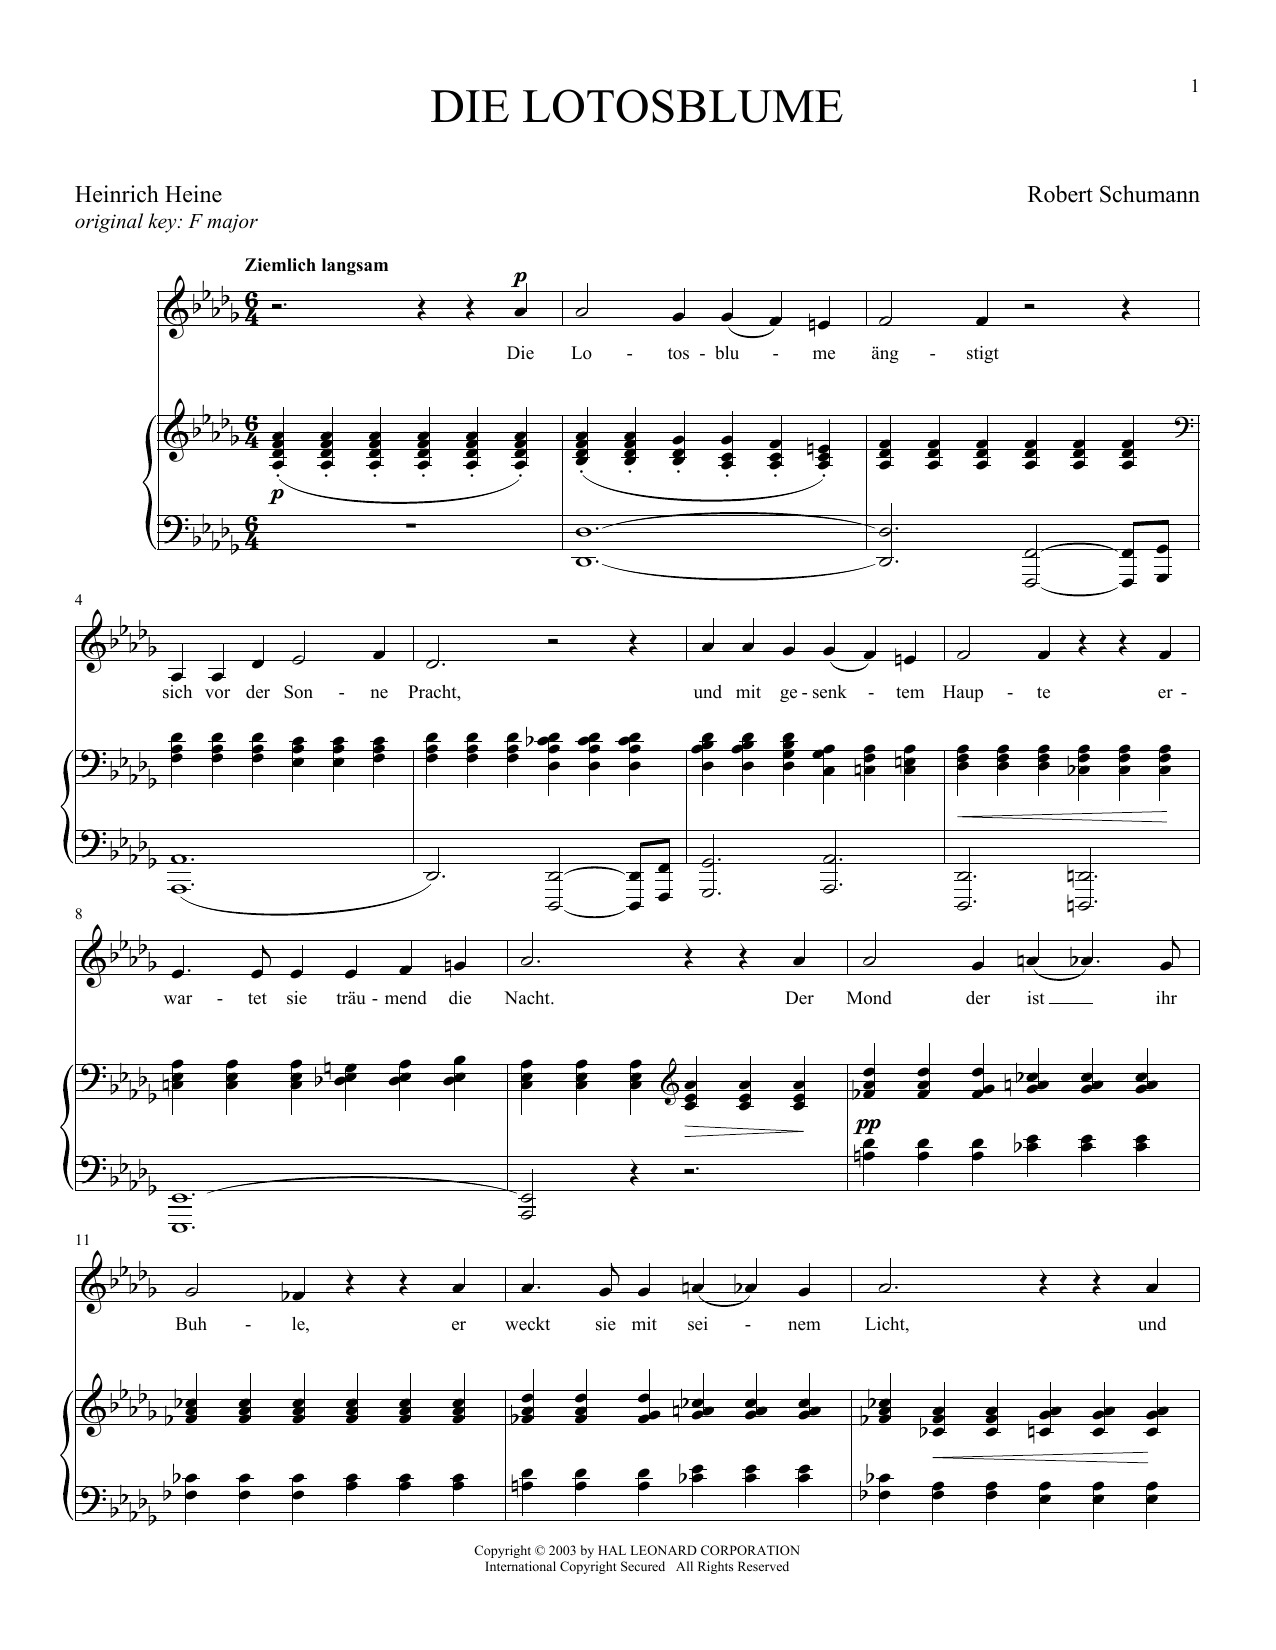 Robert Schumann Die Lotosblume sheet music notes and chords. Download Printable PDF.